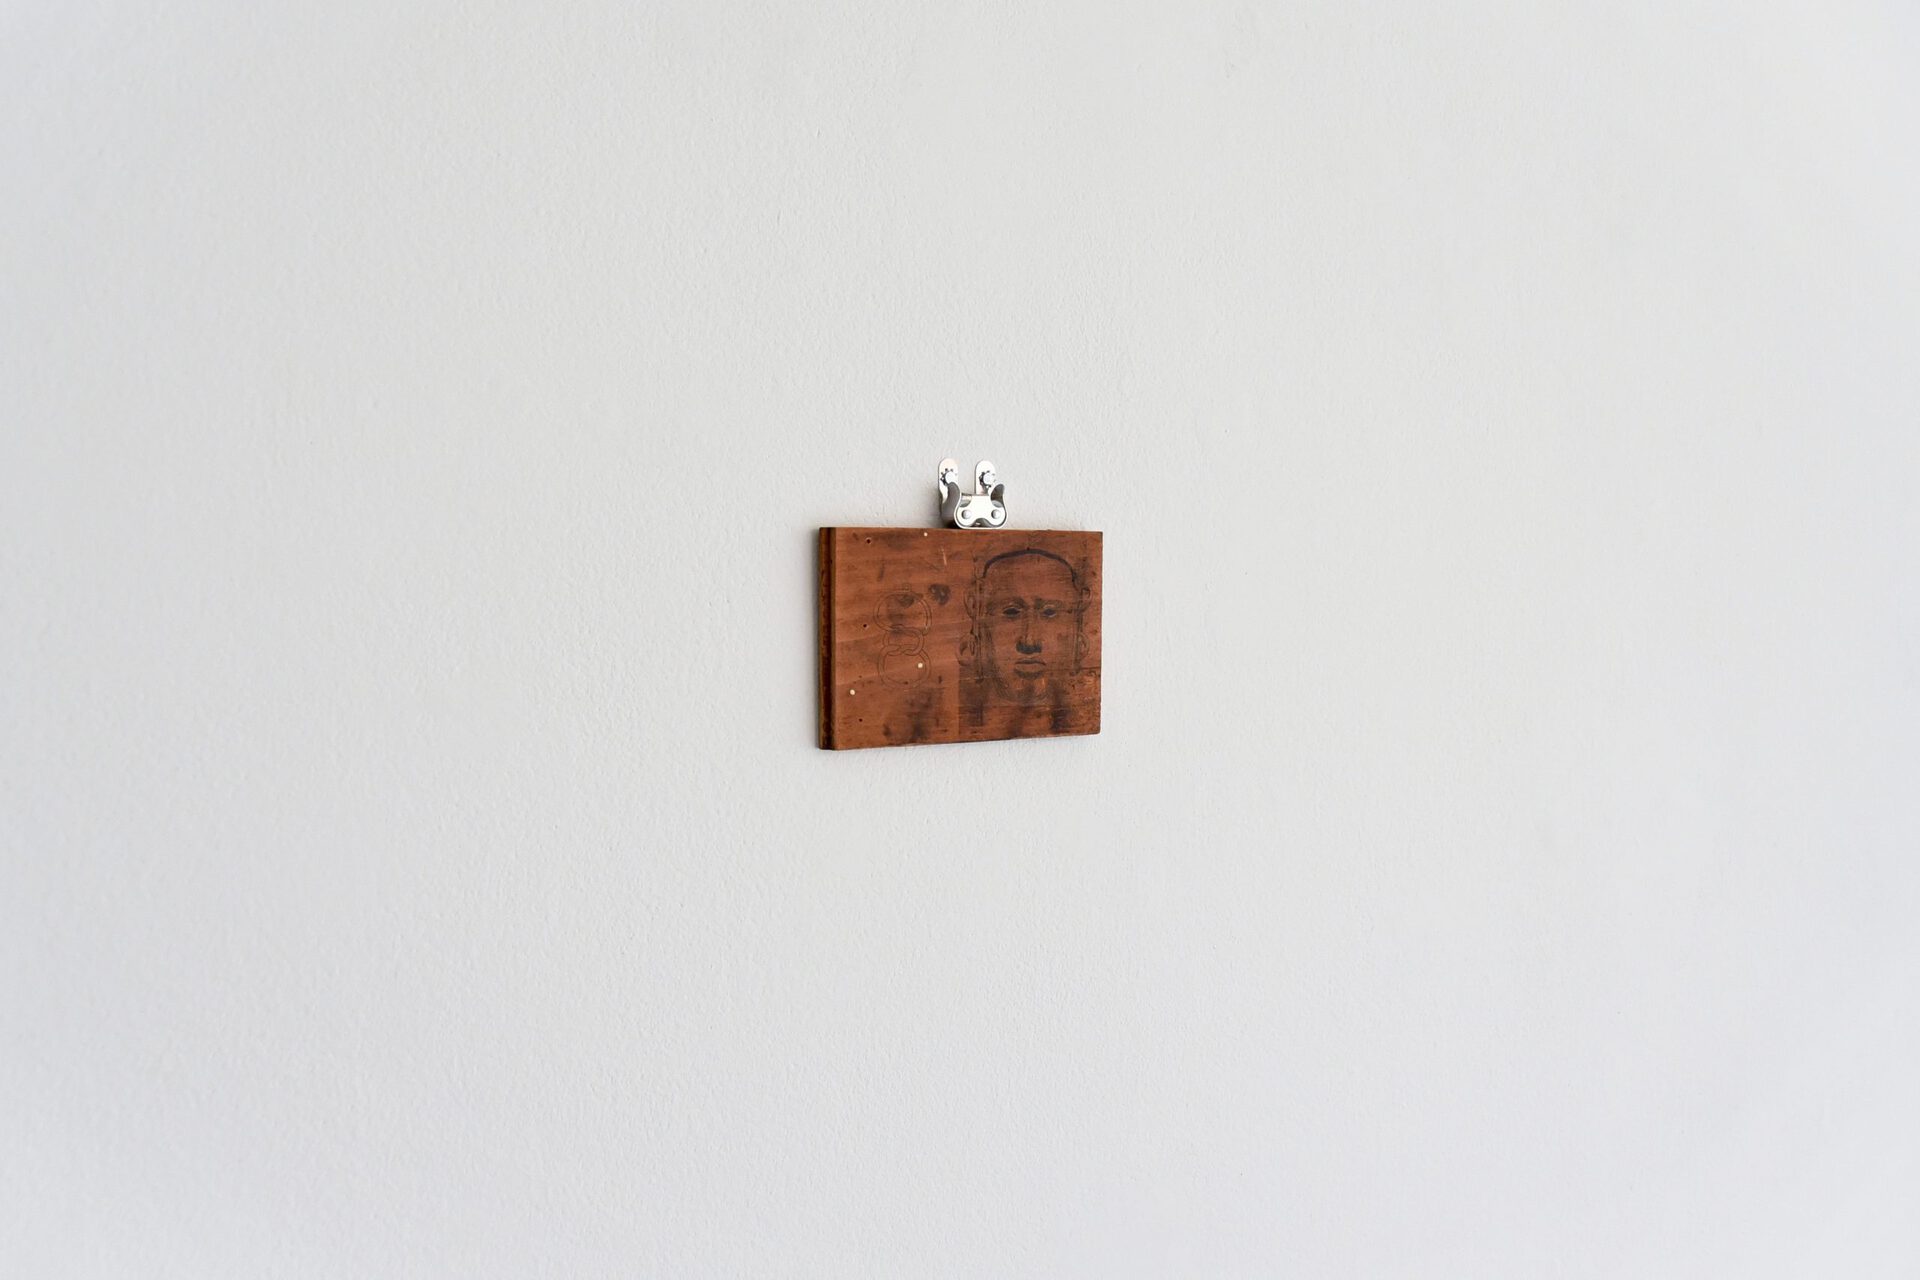 Jerome Sicard, Untitled (installation view), 2022, Ink on carved wood, hardware. 5.5” x 4.5”.